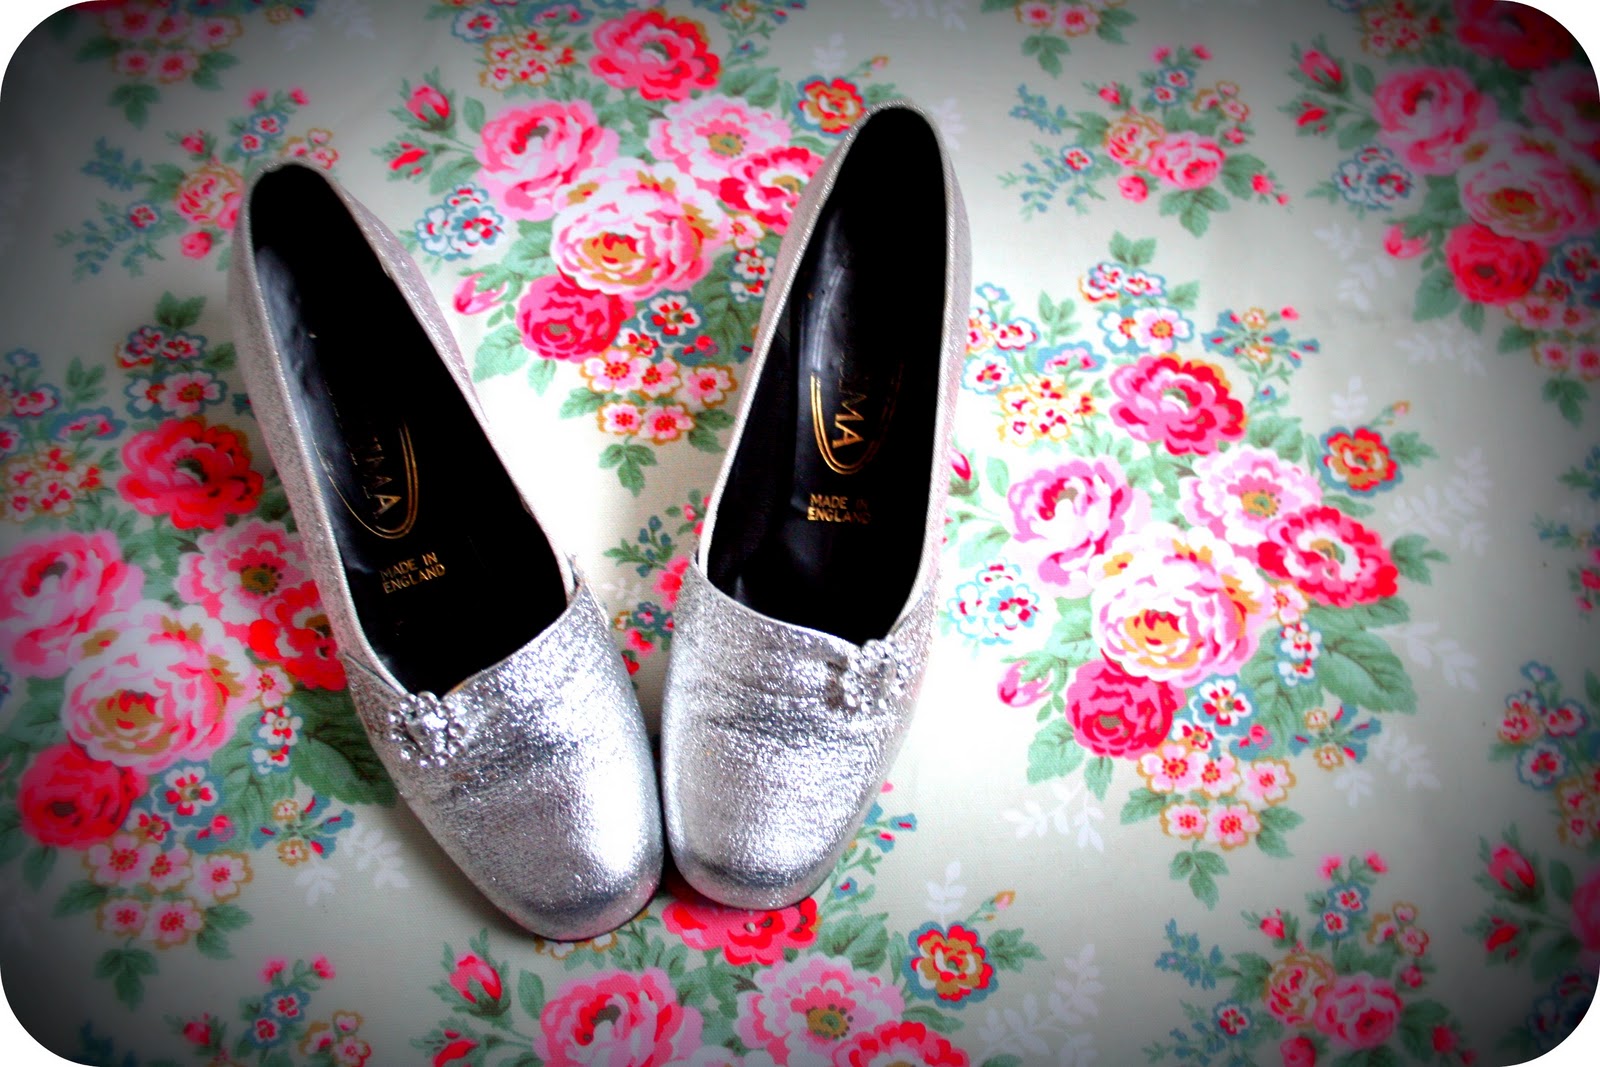 Fancy Vintage: Gold and Silver Vintage Shoe Collection.